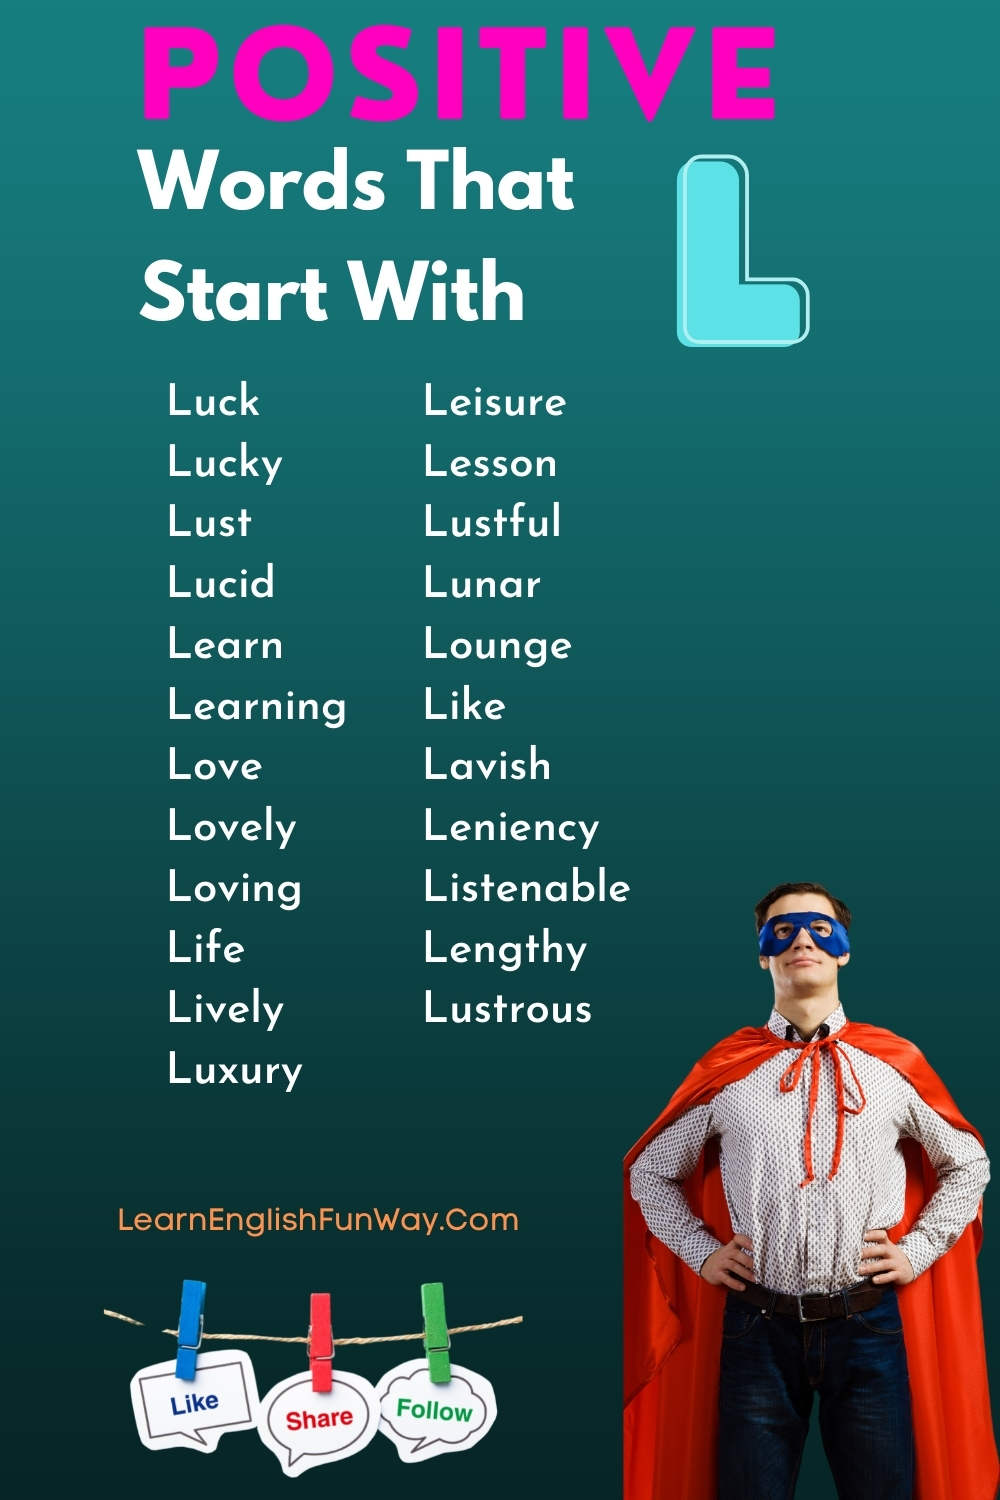 Positive Words That Start With L